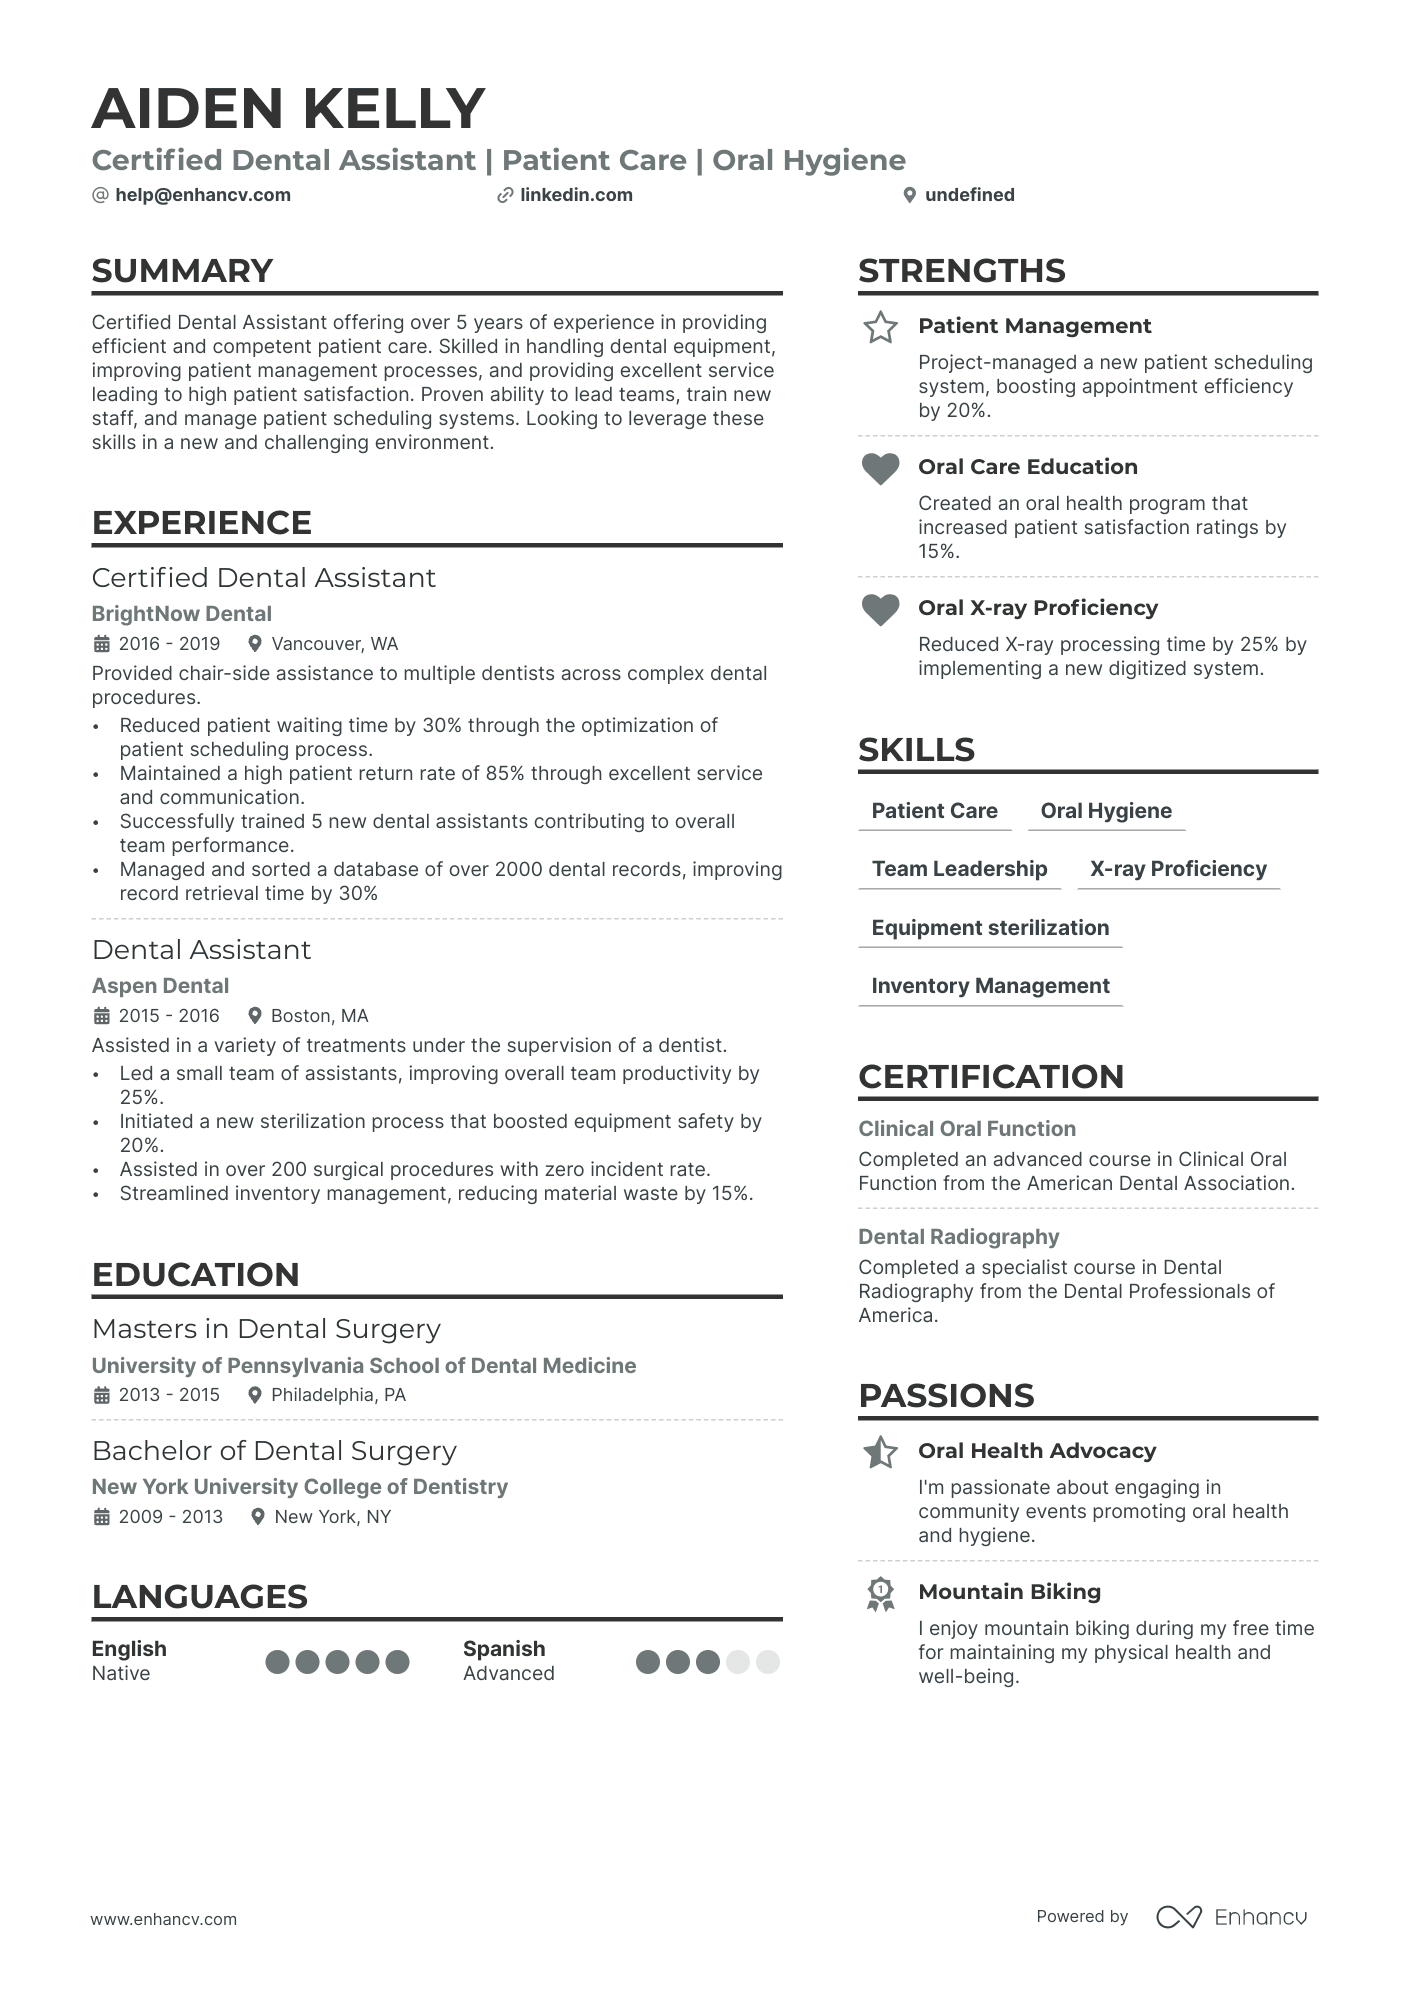 Certified Dental Assistant resume example